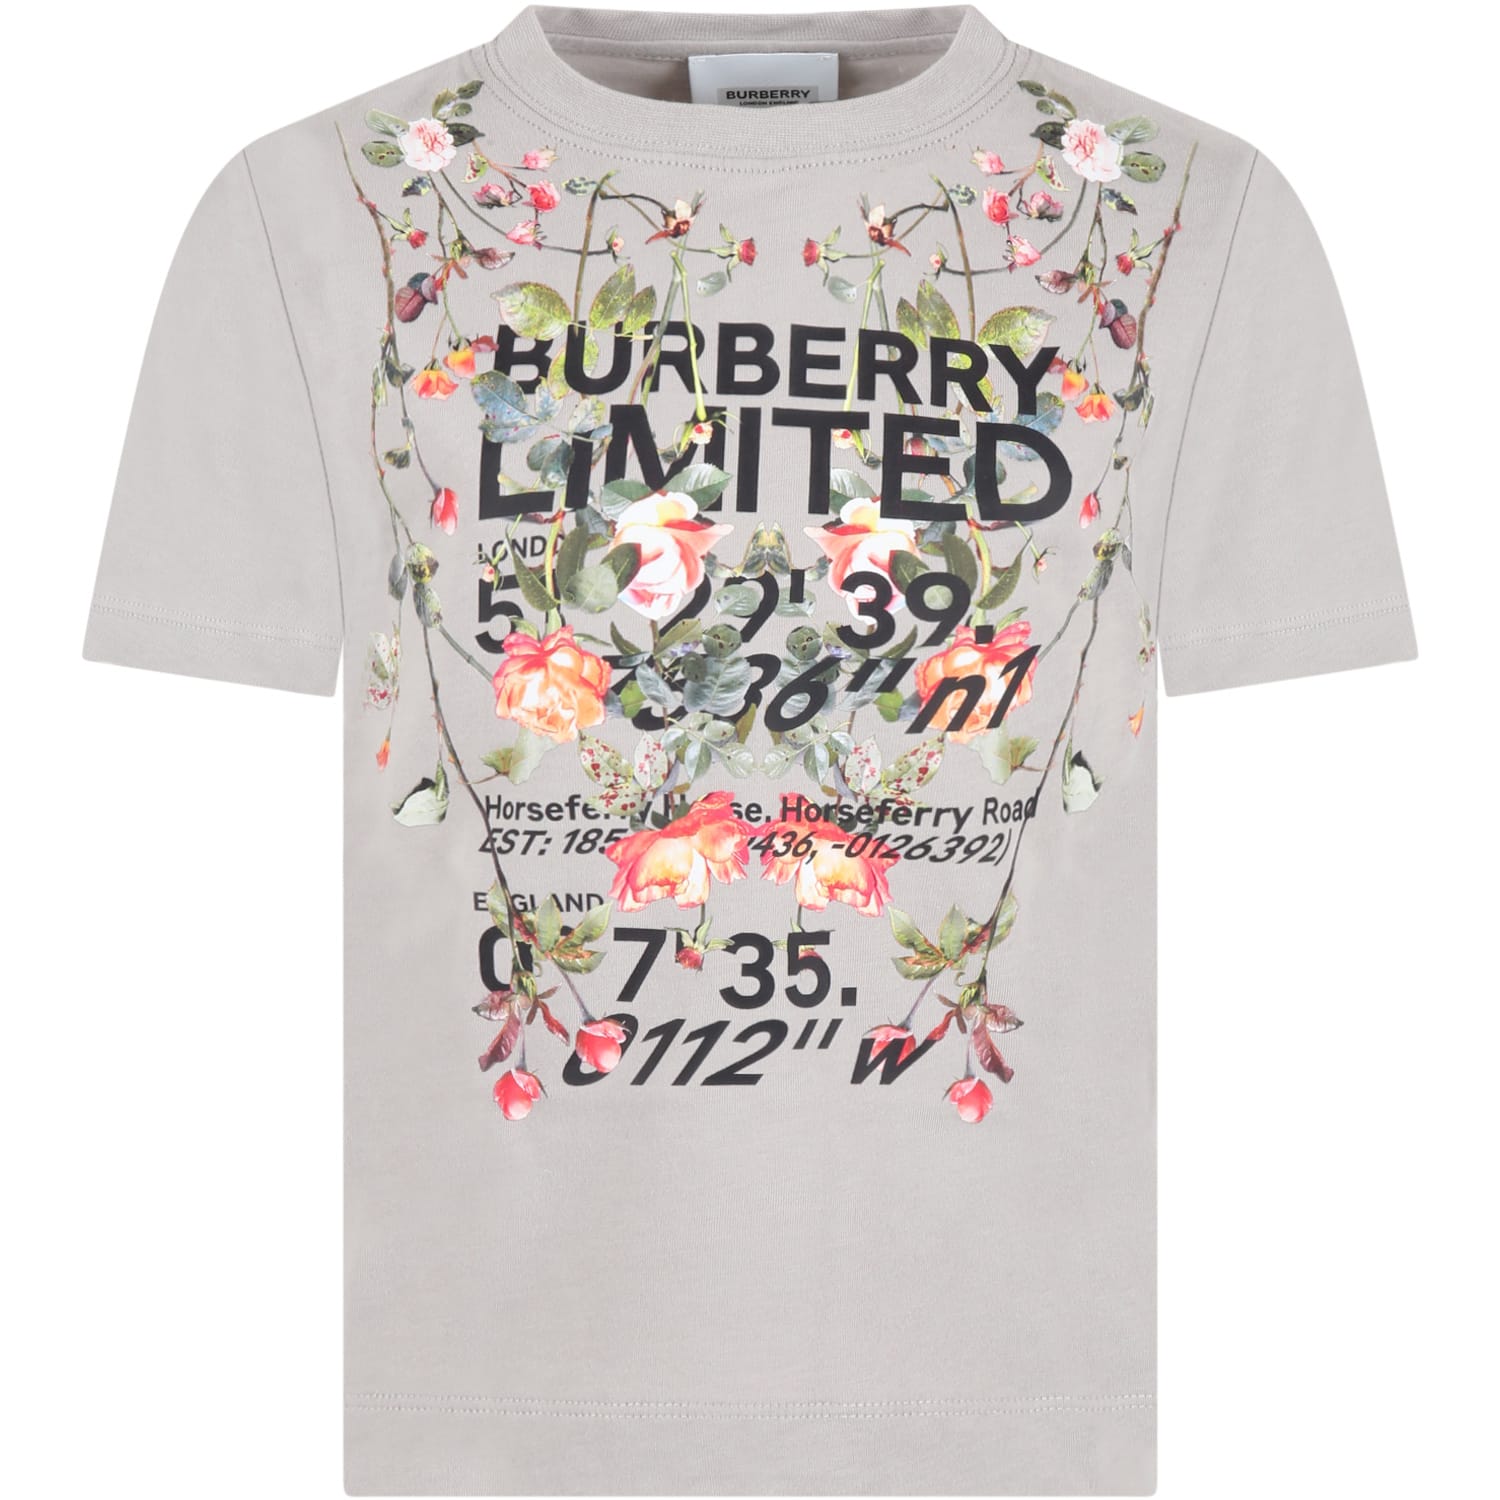 Burberry Grey T-shirt For Kids With Flowers